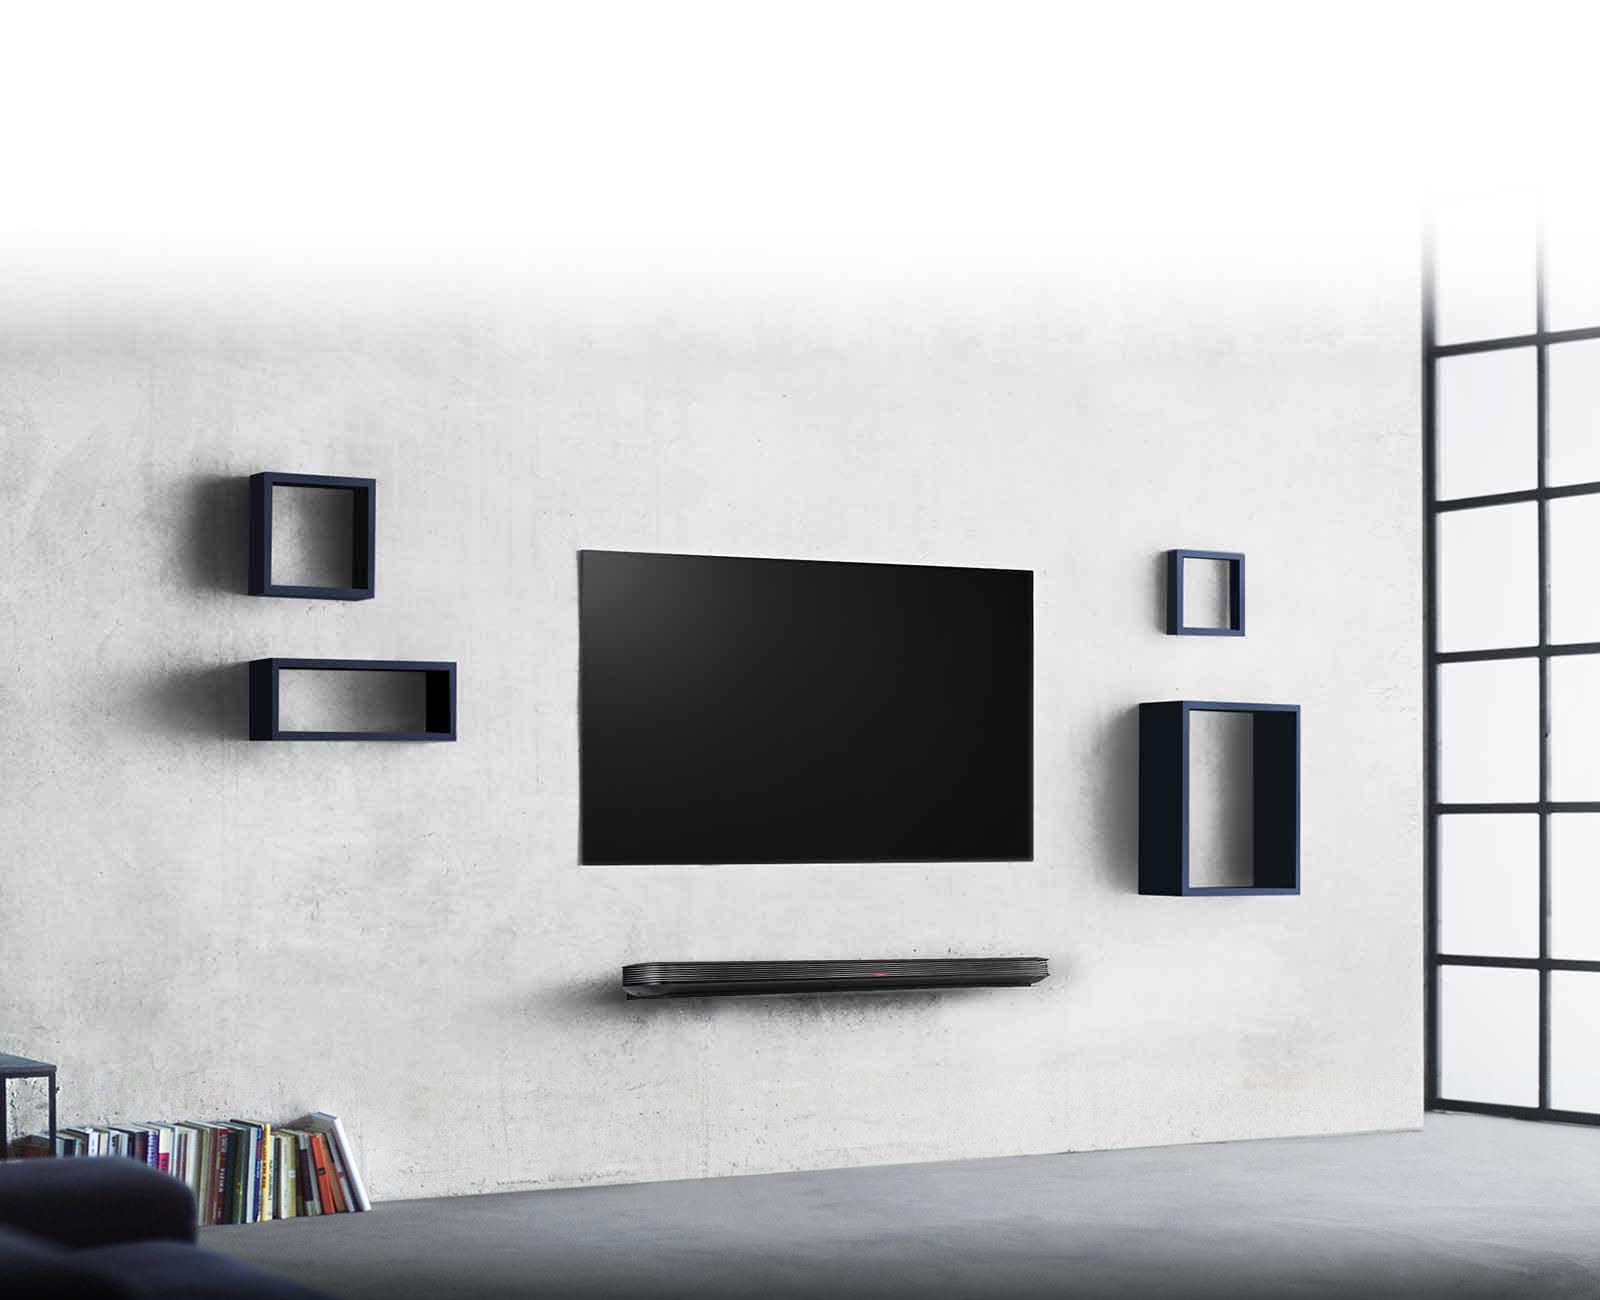 So Thin And Light It Attaches Directly To The Wall1 - Lg Tv On Wall - HD Wallpaper 